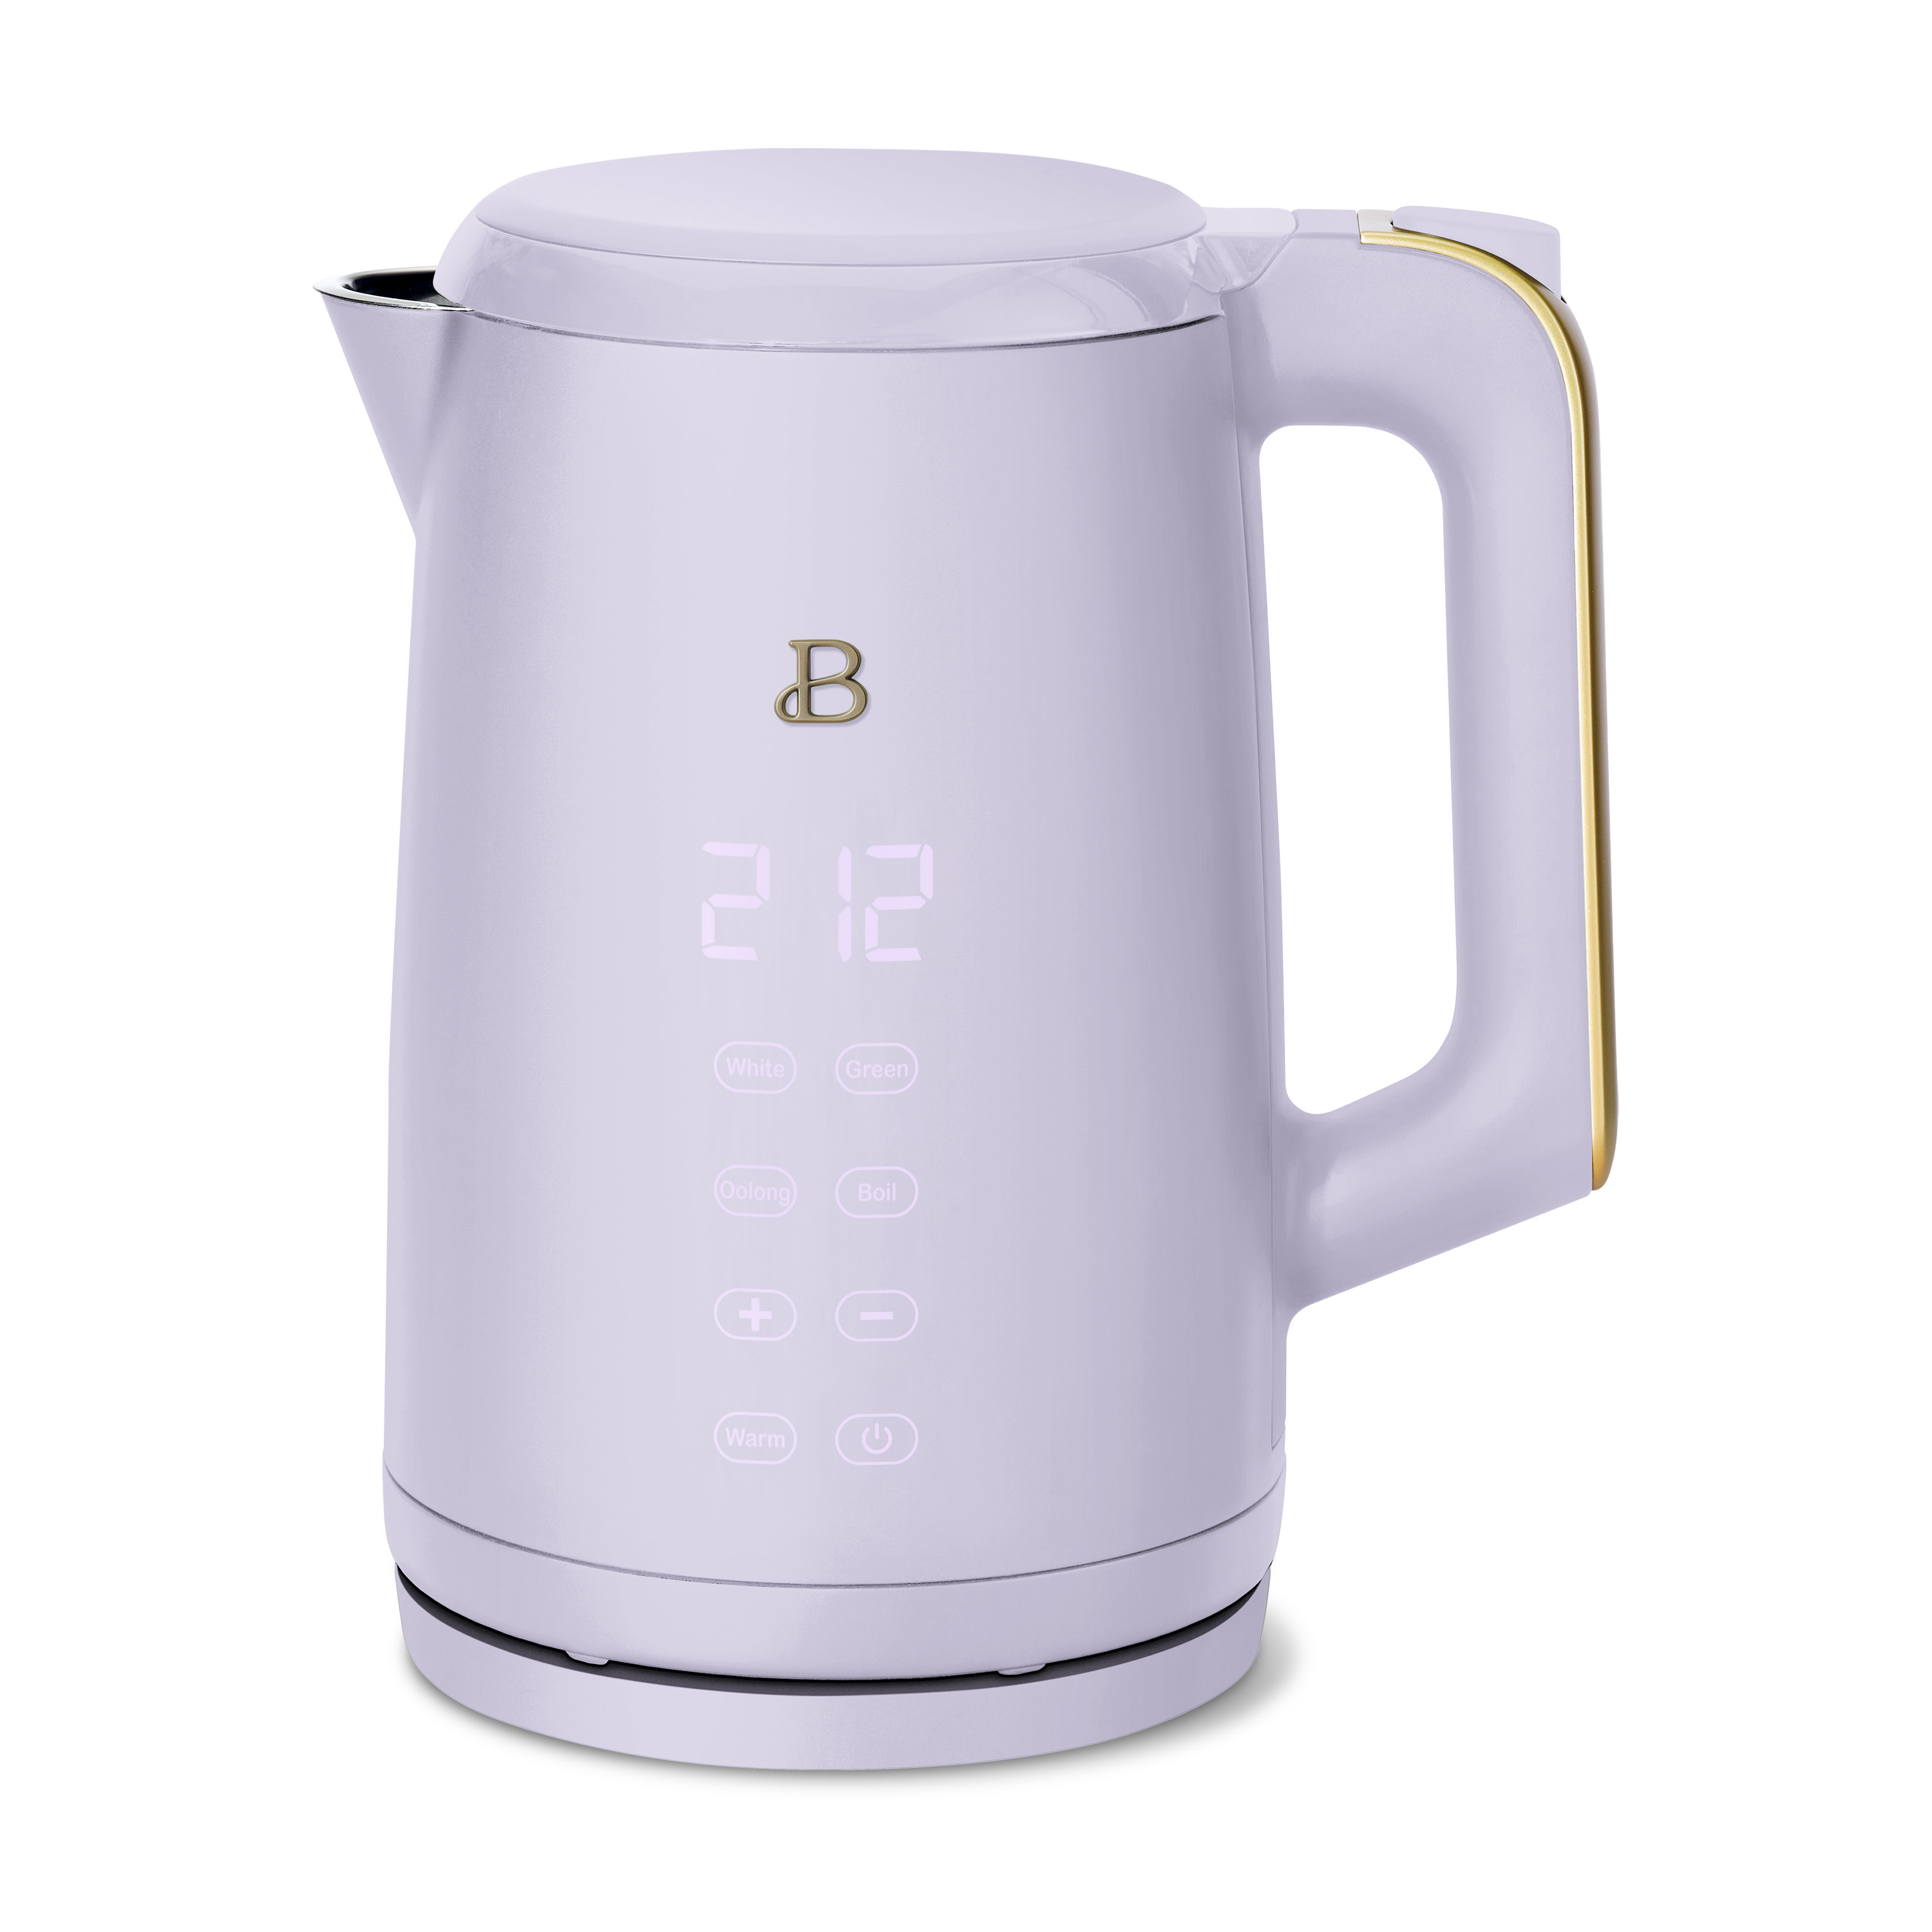 Beautiful 1.7-Liter Electric Kettle 1500 W with One-Touch Activation, Lavender by Drew Barrymore - image 1 of 6